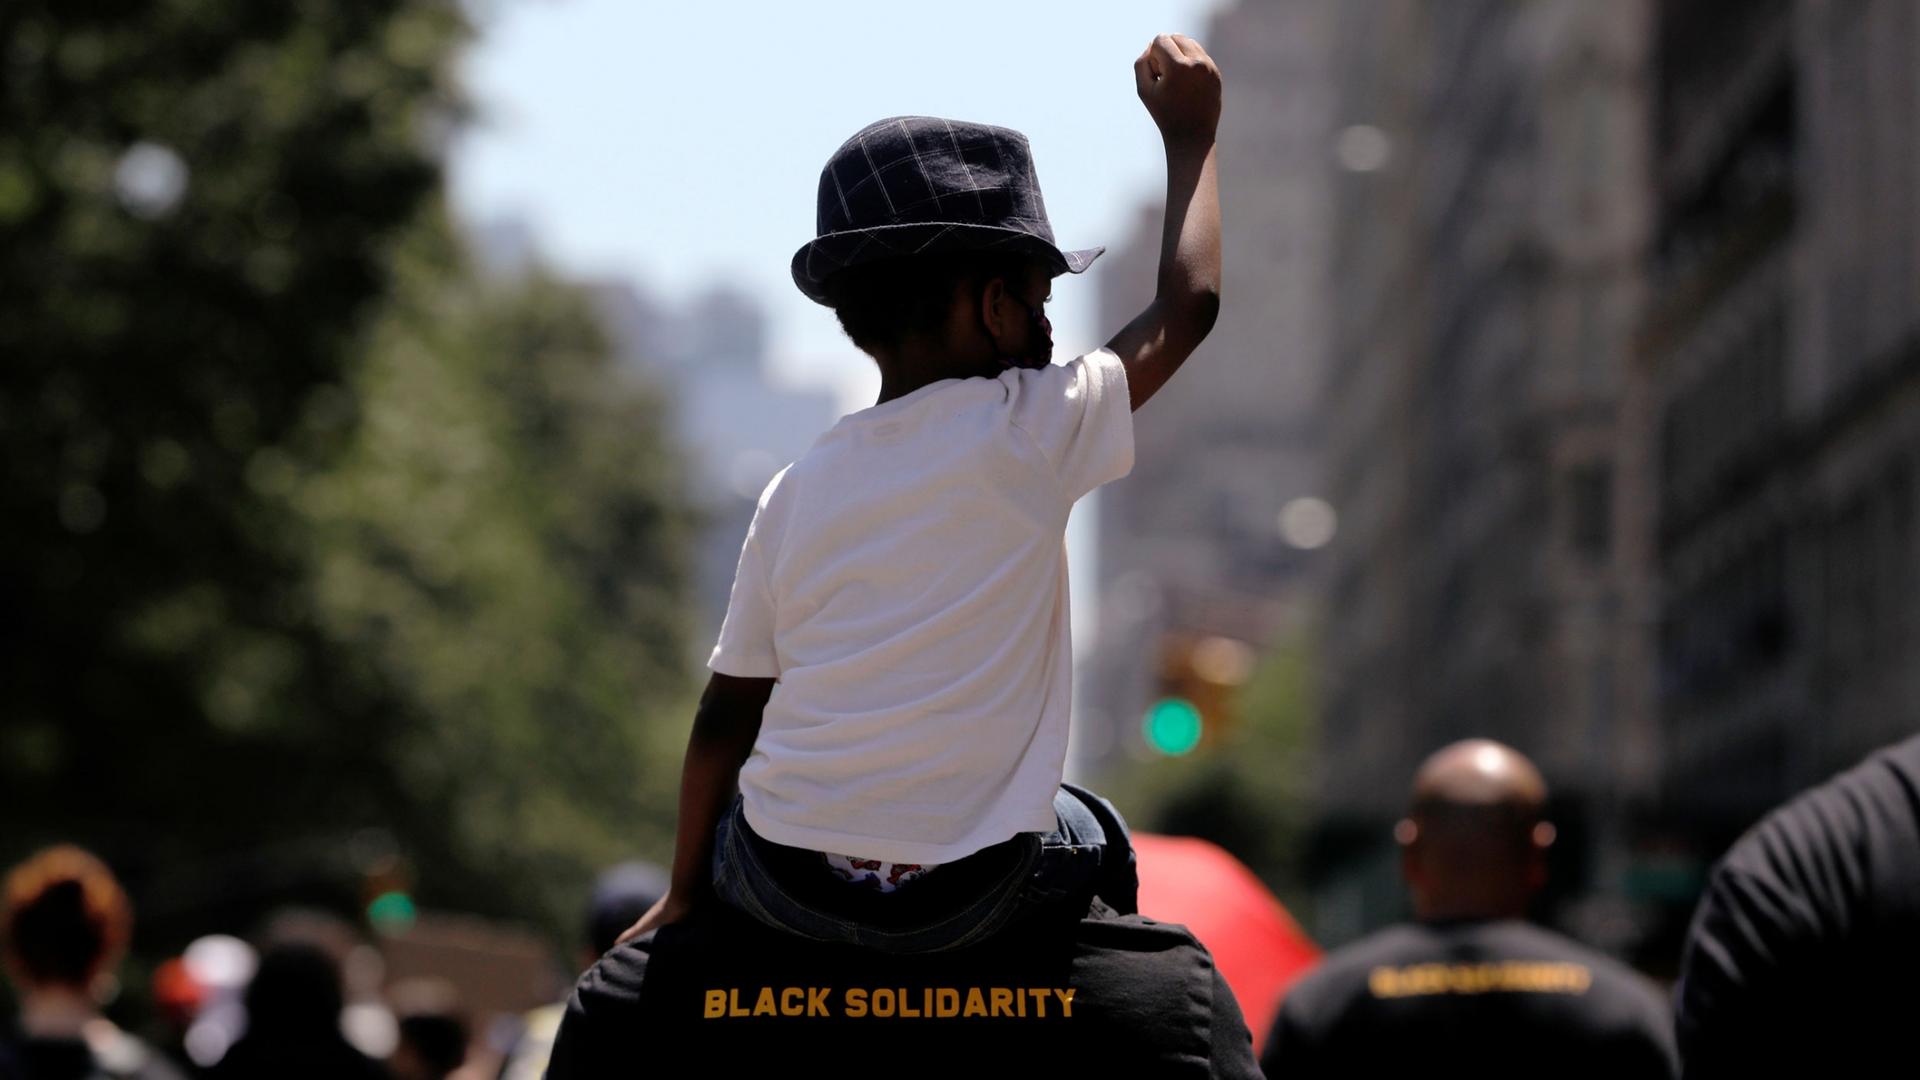 A young boy is shown wearing a white t-shirt and had while sitting on the shoulder of a man wearing a shirt with "Black Solidarity" printed on it.